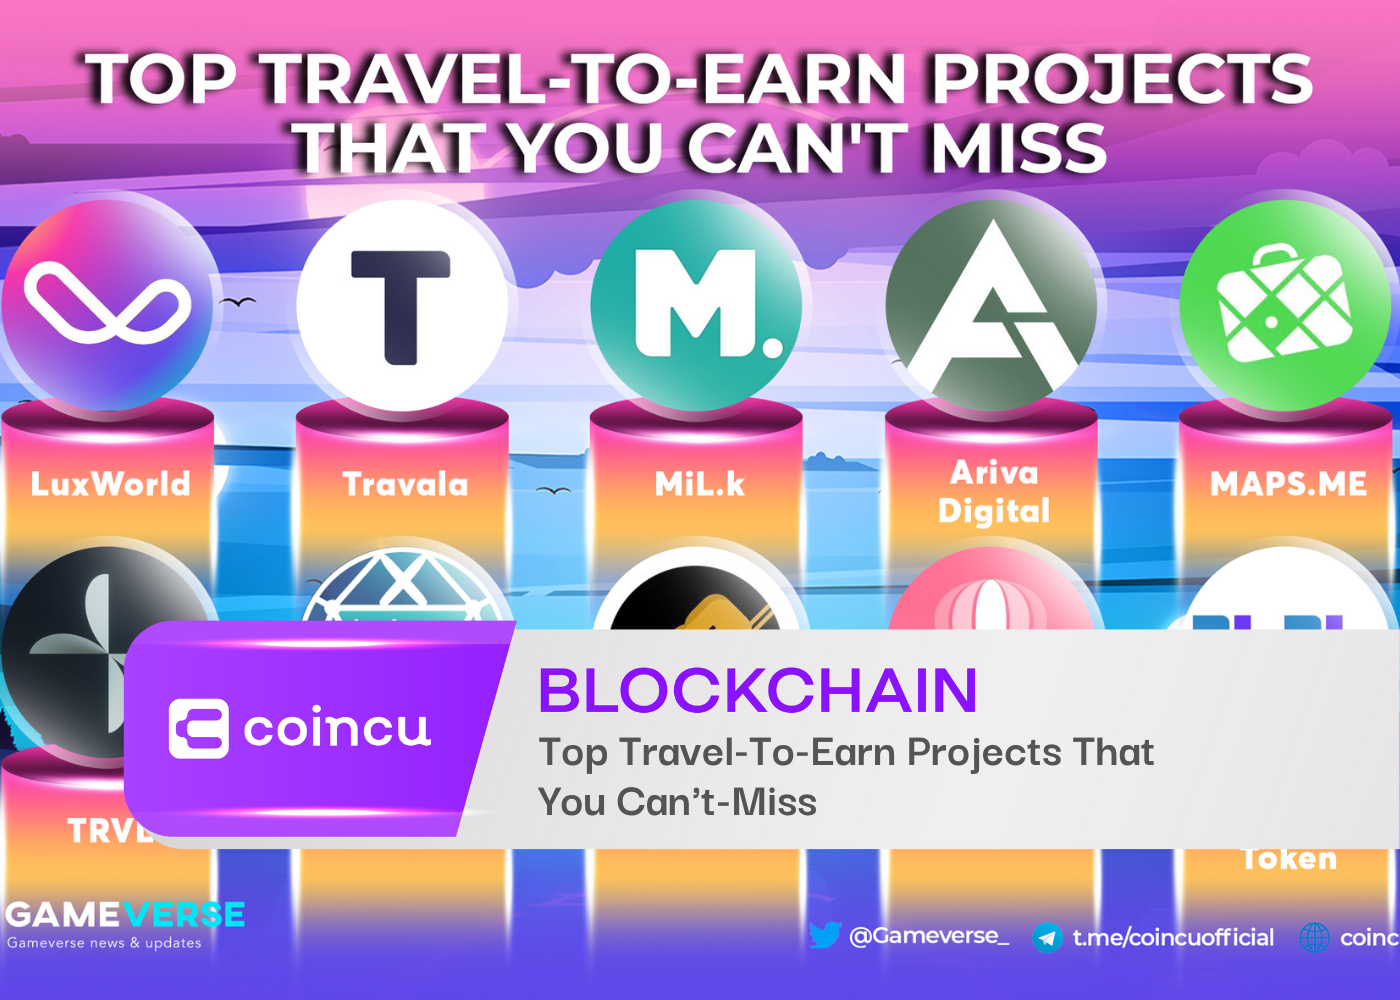 Top Travel-To-Earn Projects That You Can't-Miss